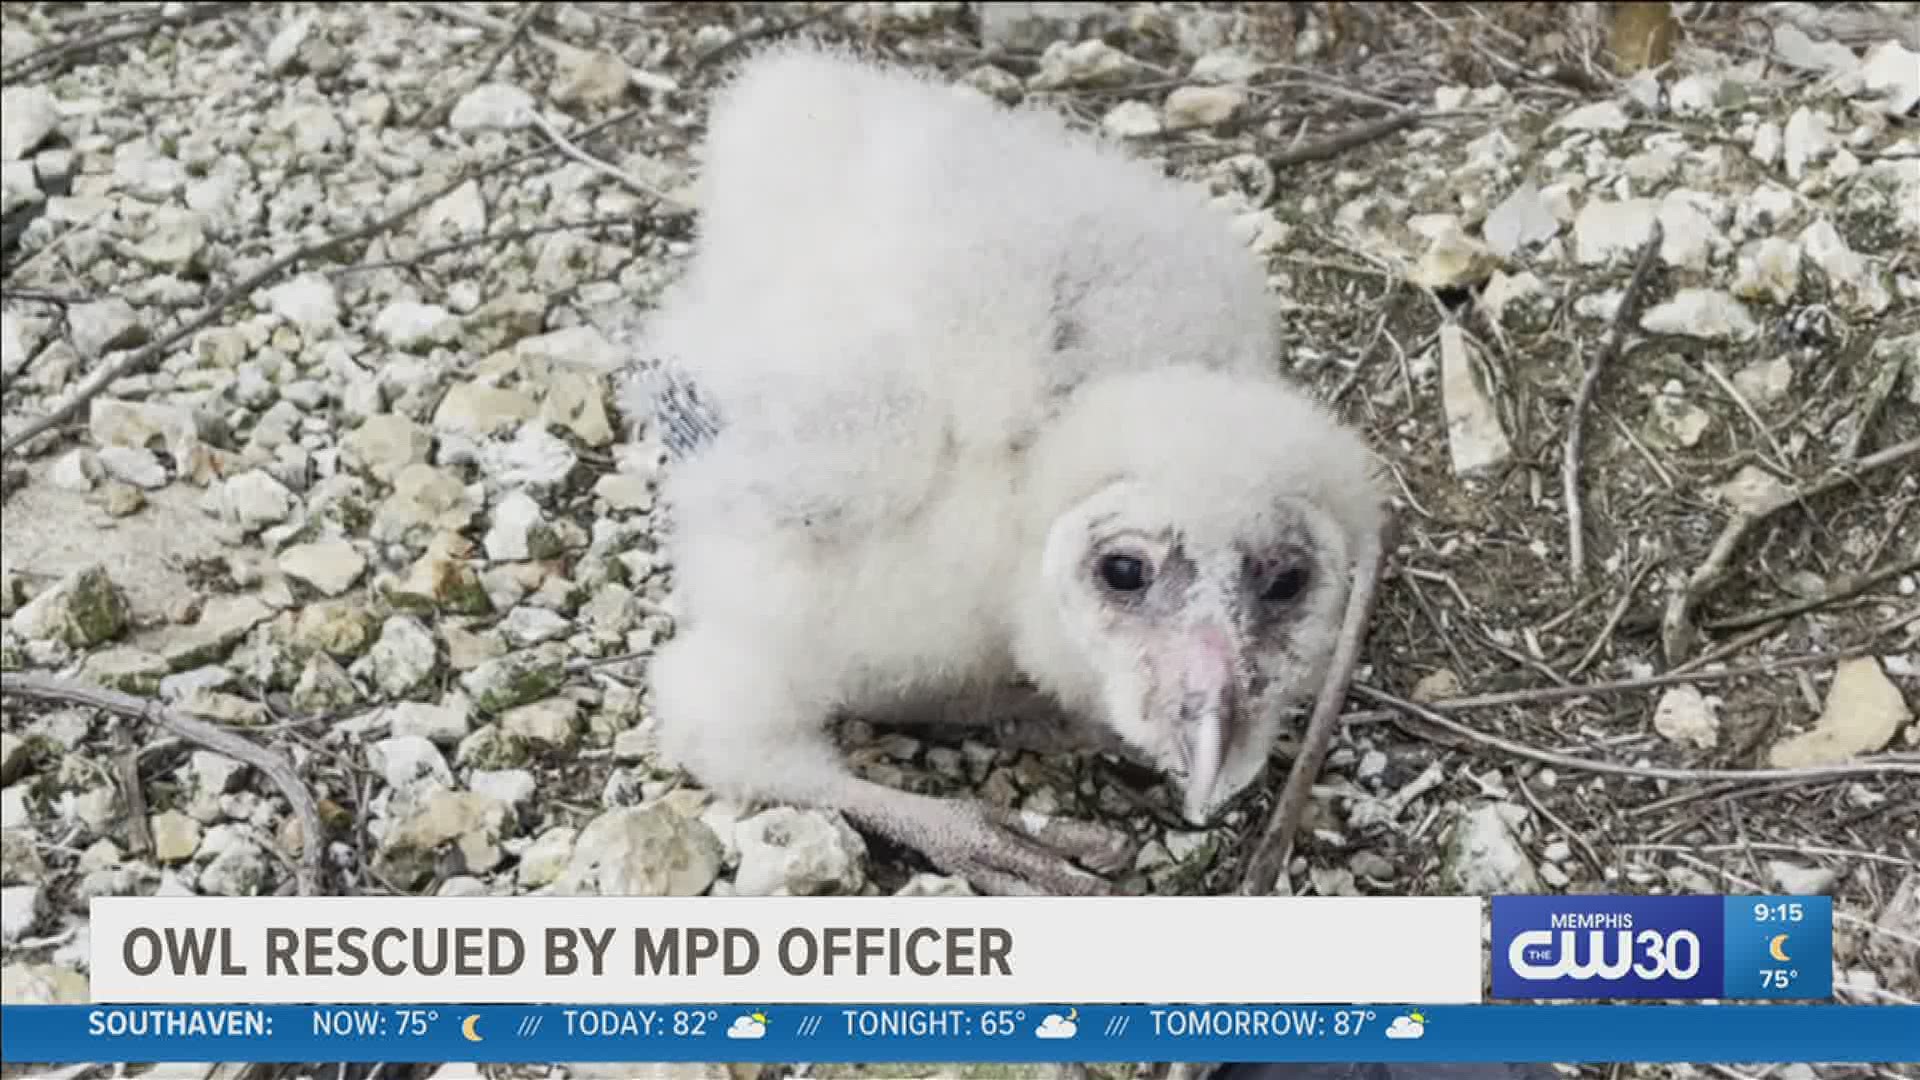 After seeing a baby owl on the side of the road, an officer called a local rescue group.